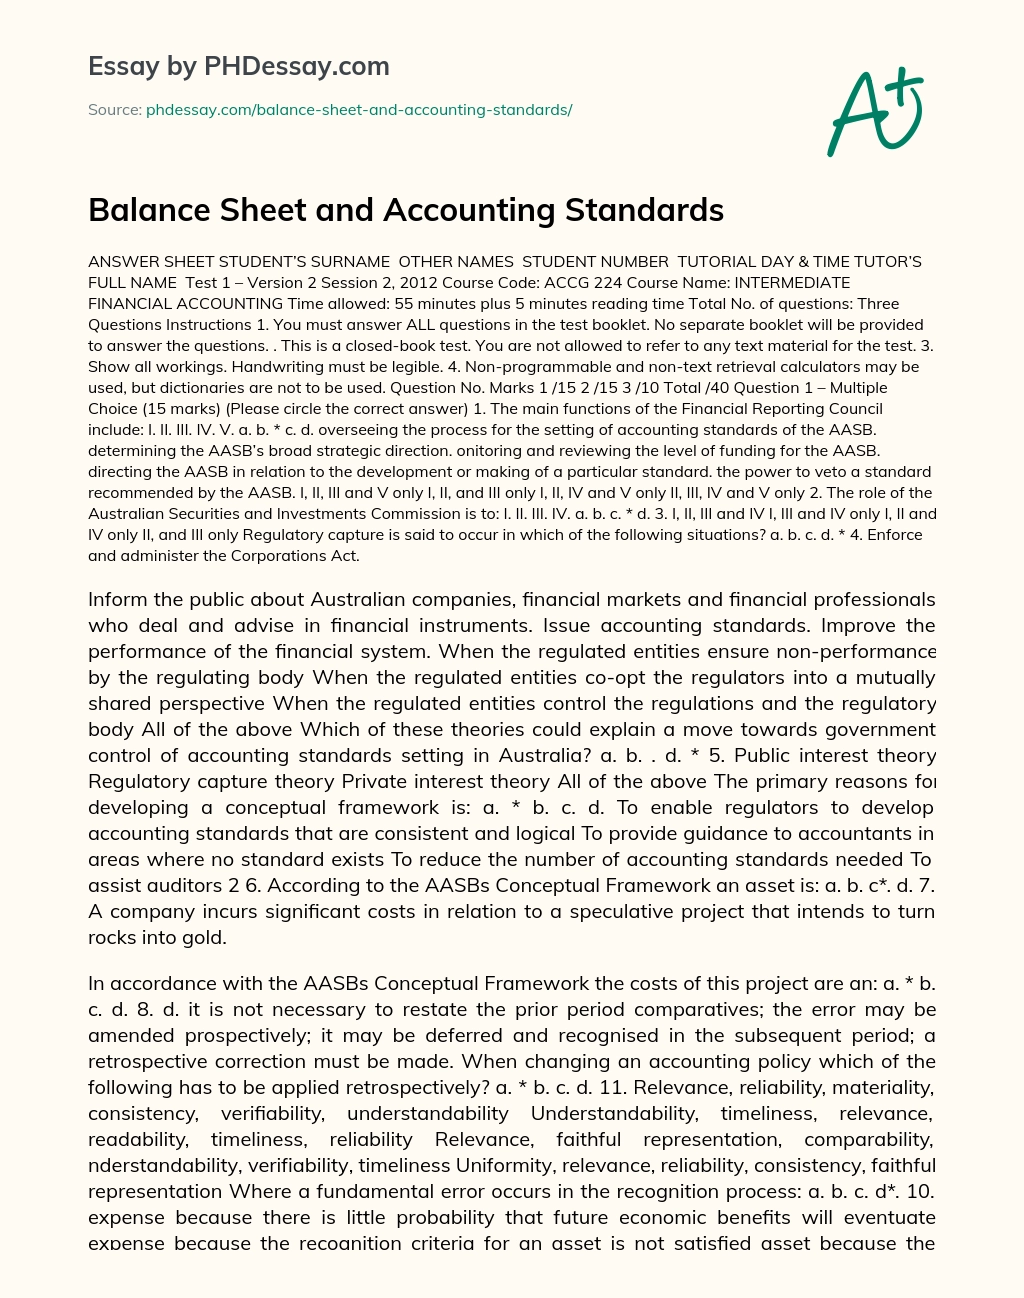 Balance Sheet and Accounting Standards essay